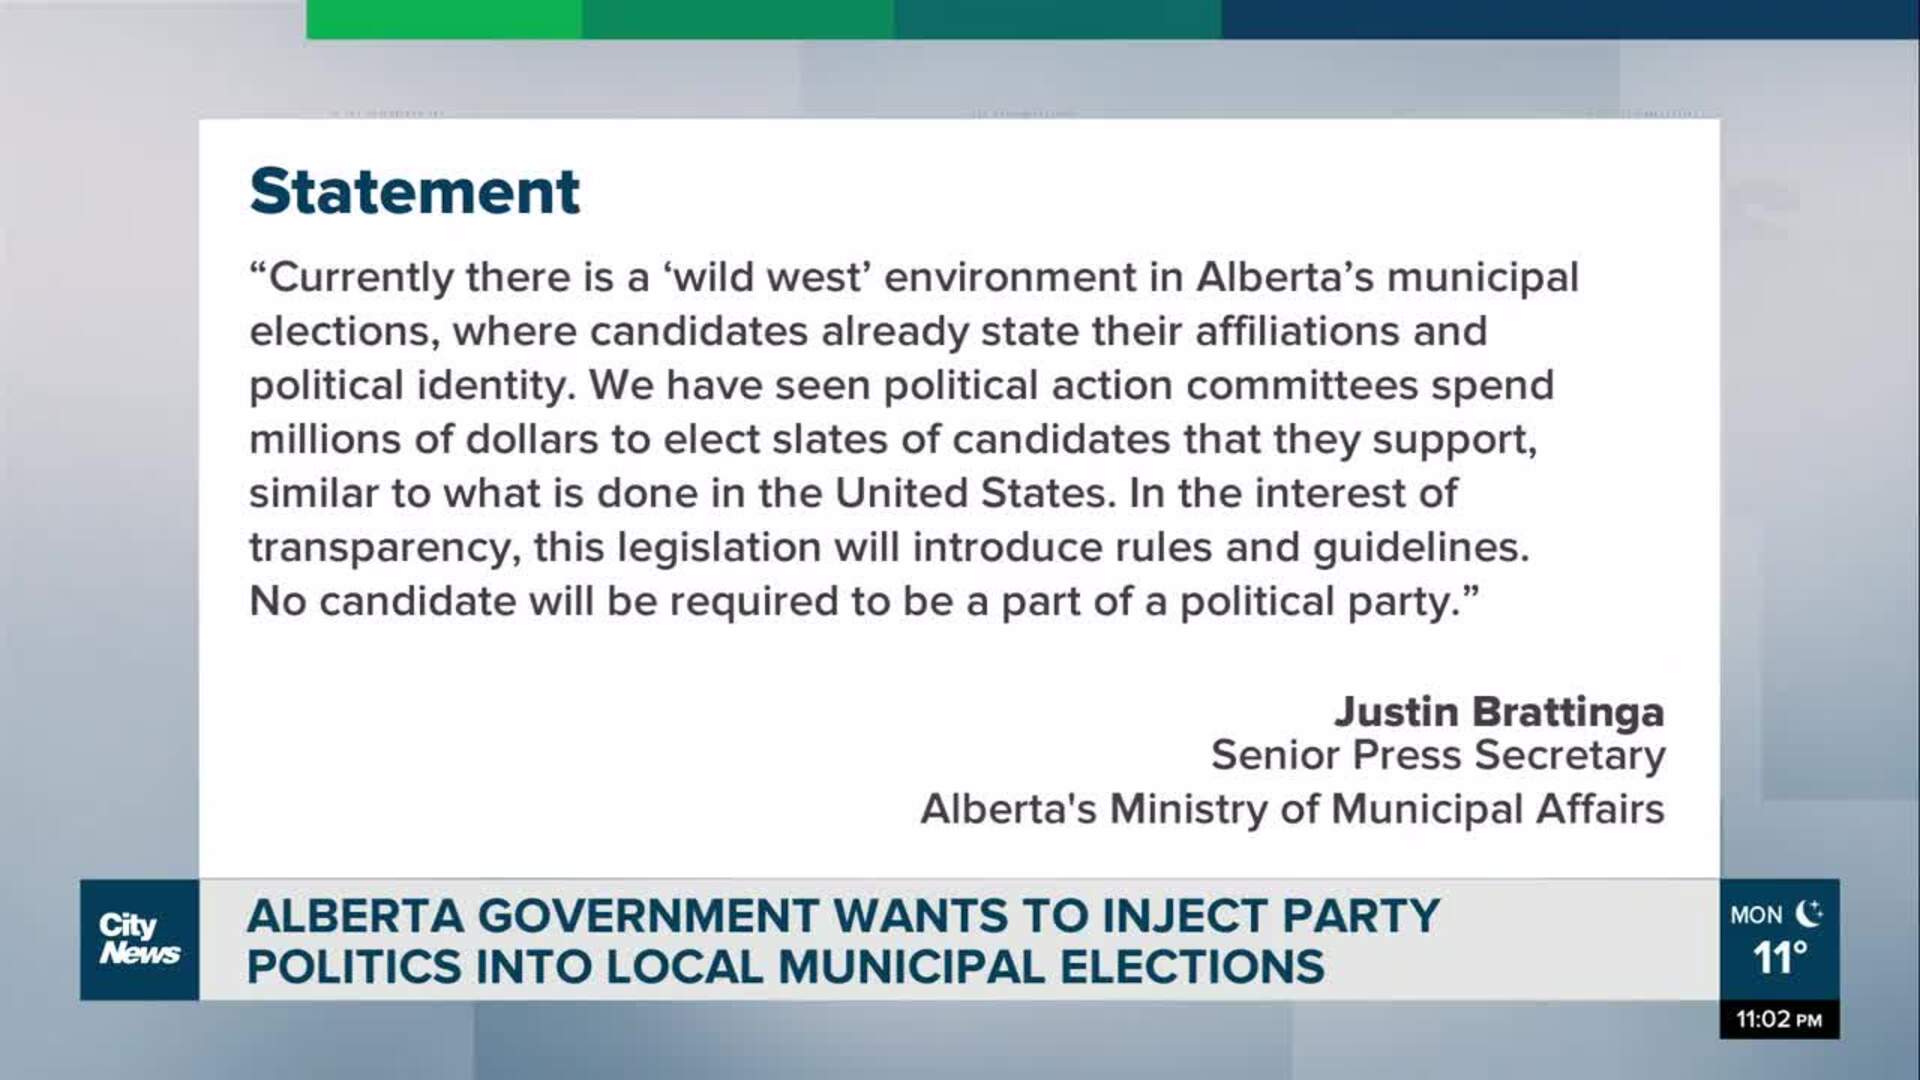 Alberta government to inject party politics into local municipal elections